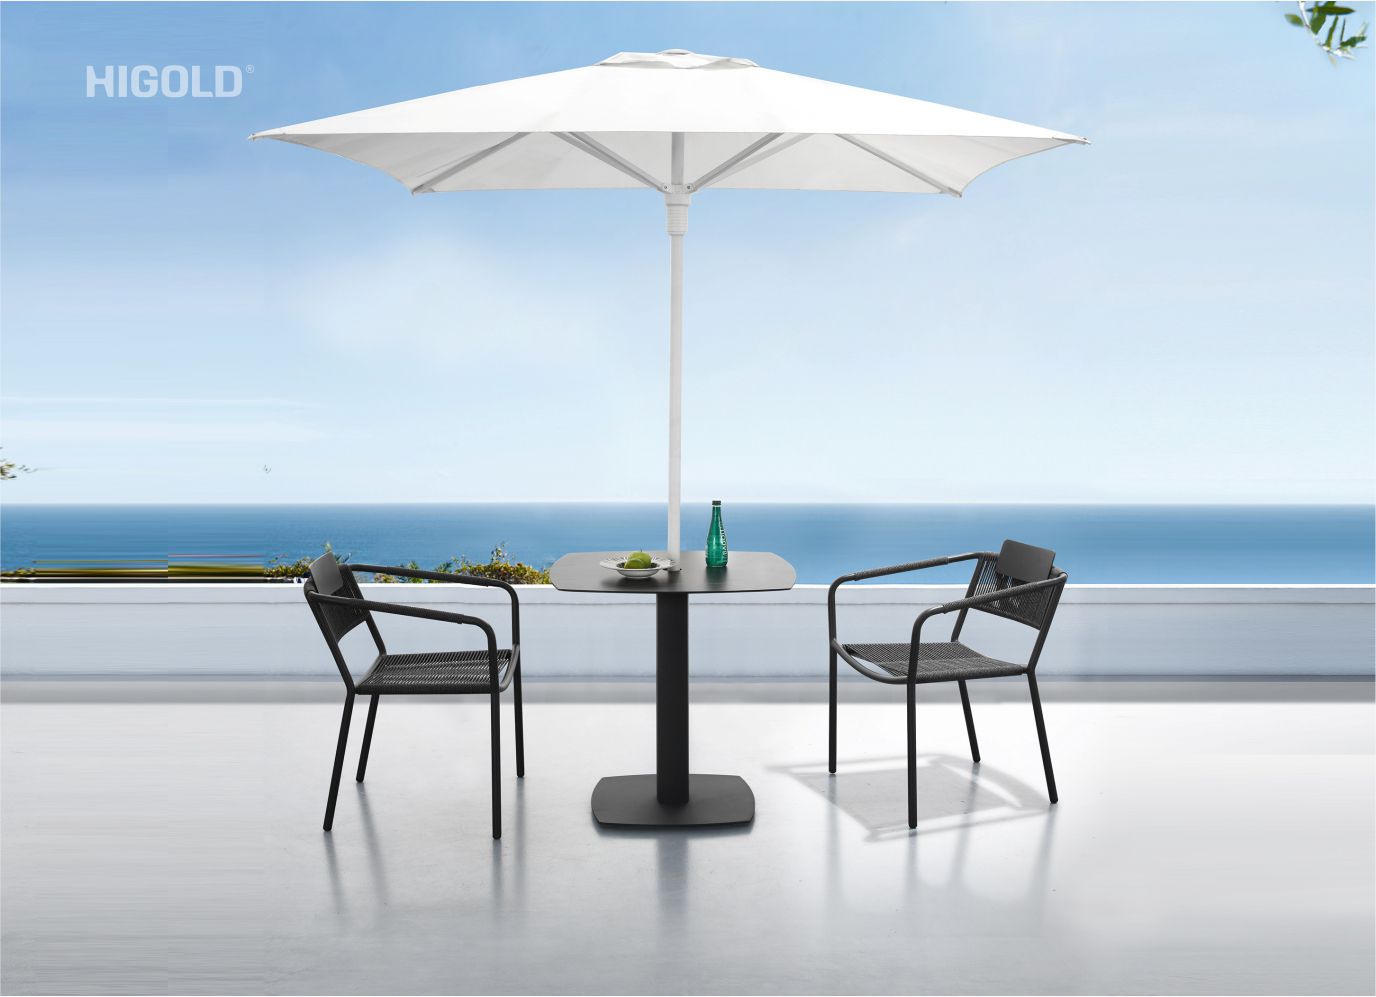 Kiwi outdoor dining set for 4